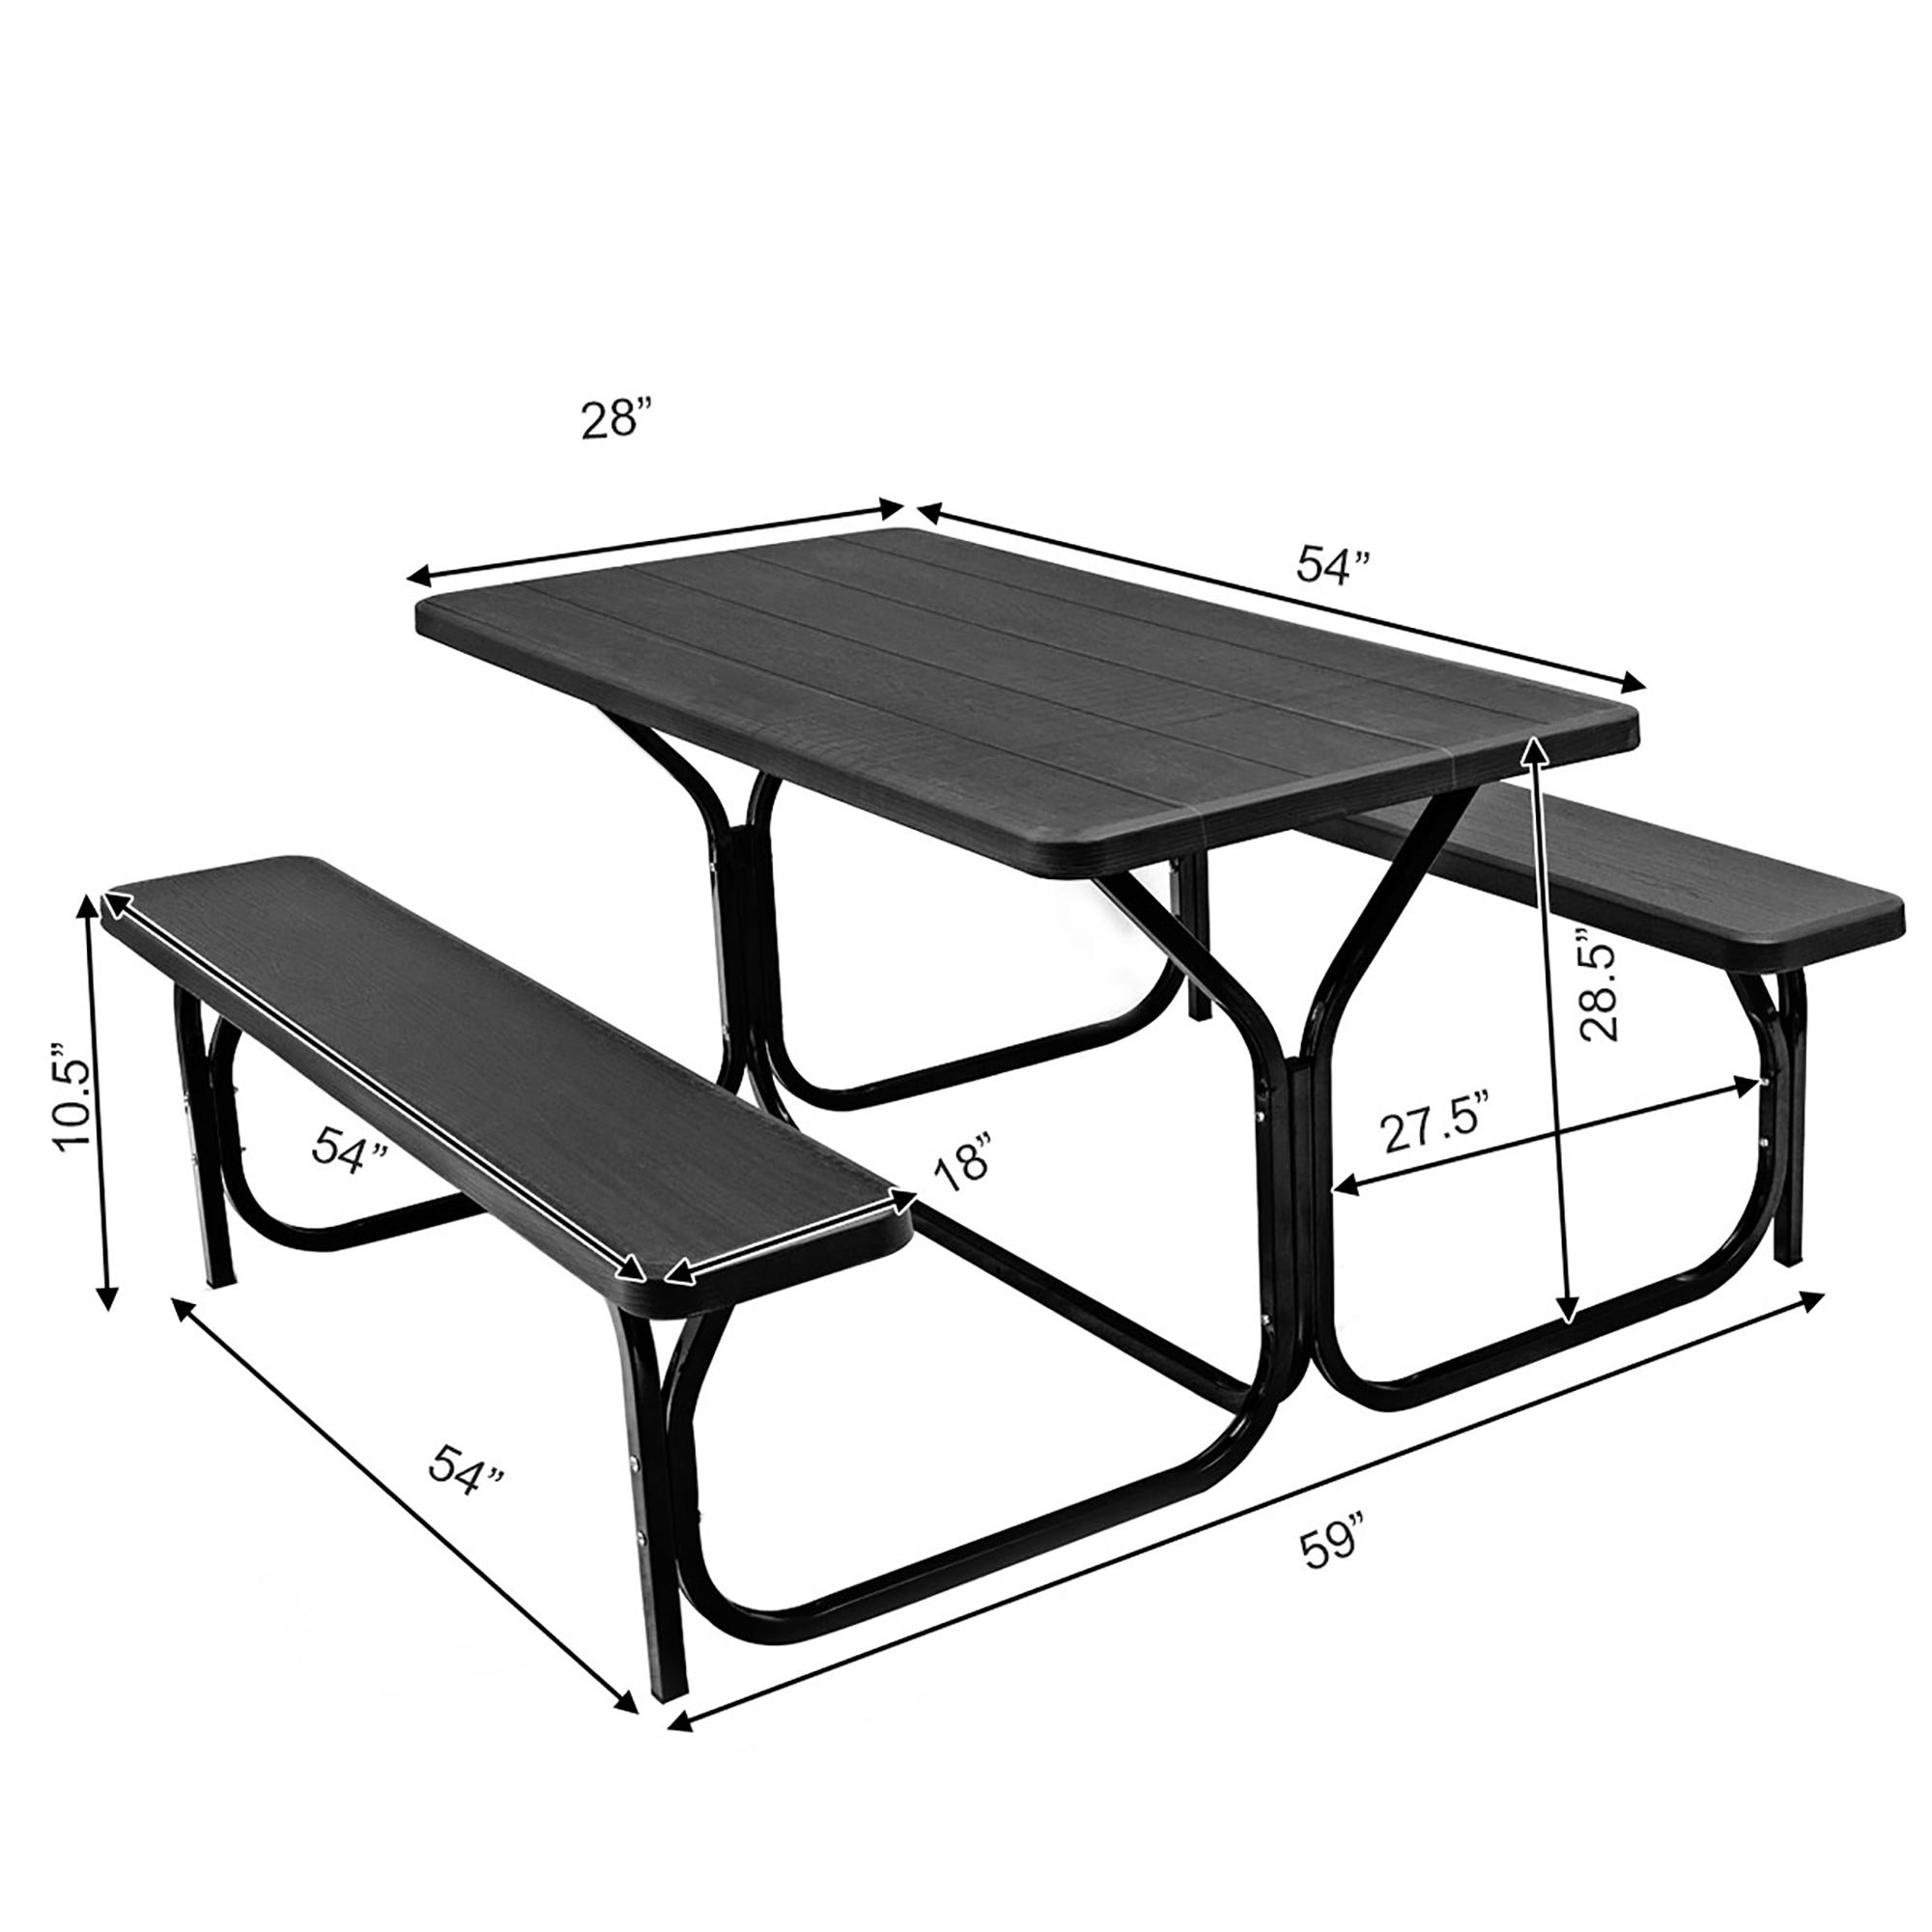 Costway Picnic Table Bench Set Outdoor Backyard Iron Patio Garden Party Dining All Weather Black - image 3 of 8